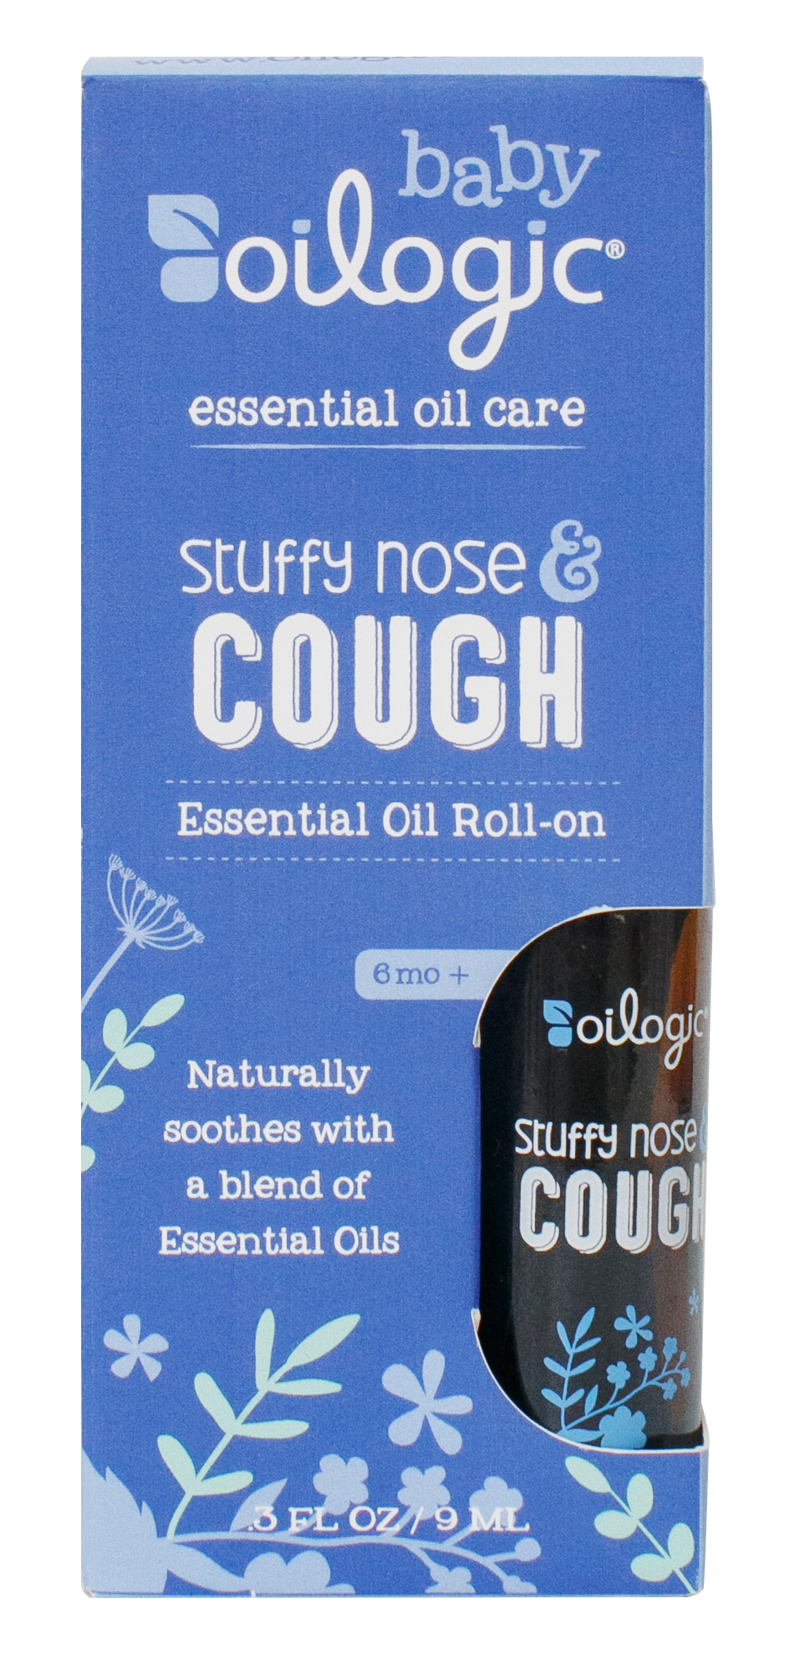 Essential oils for cough in child - Oilogic Cough & Stuffy Nose Baby blend. Best essential oils for babies cold & cough